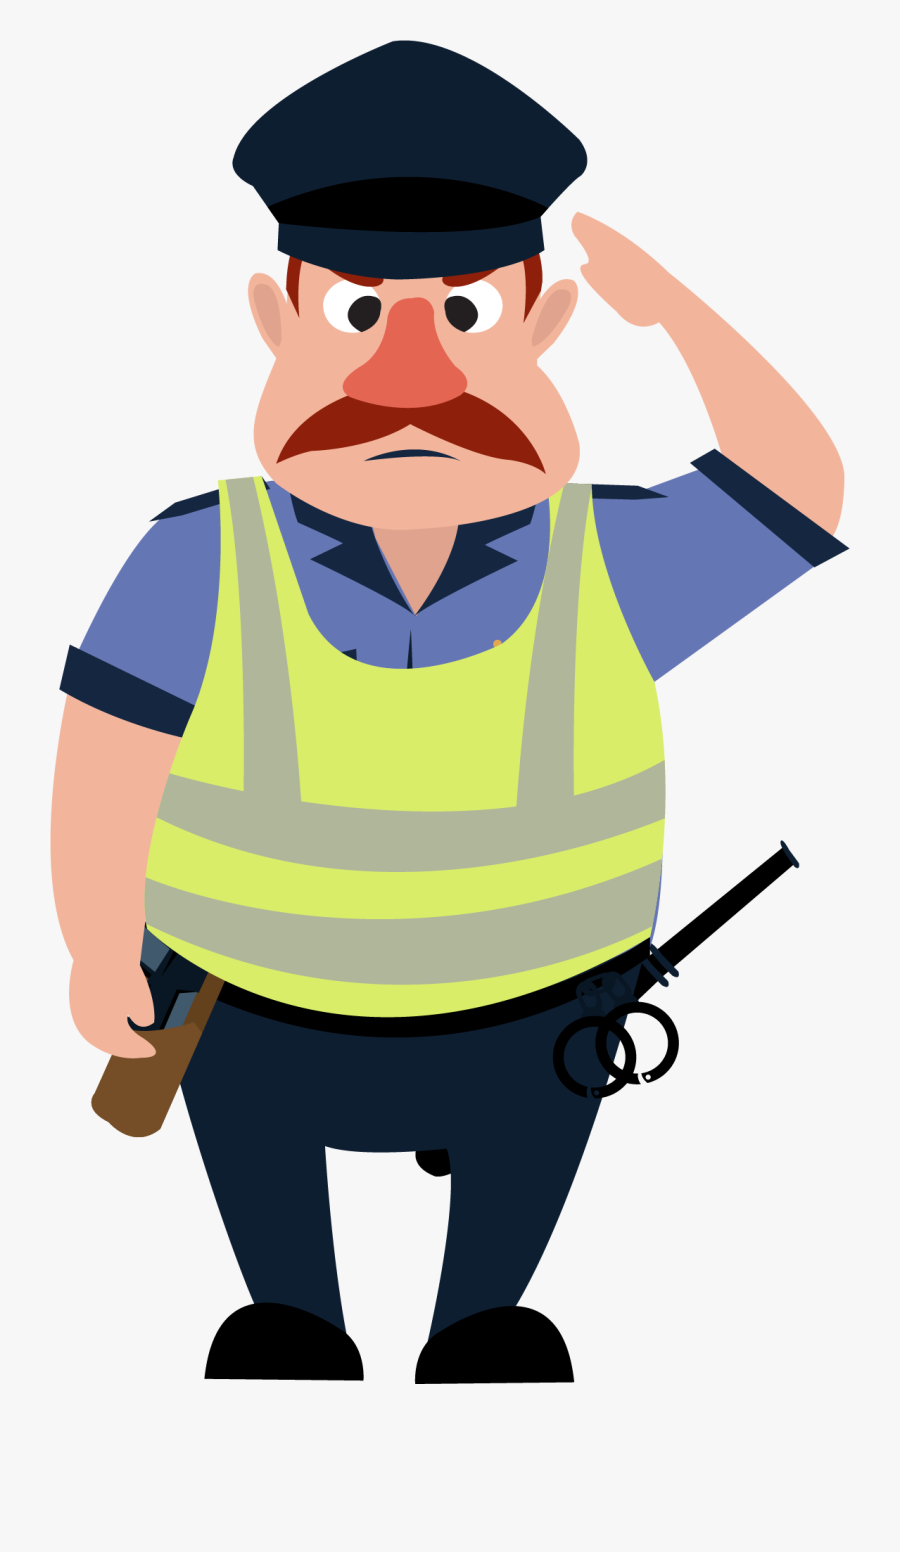 Salute Police Officer Security Guard Cartoon People"s - Police Officer Cartoon Png, Transparent Clipart